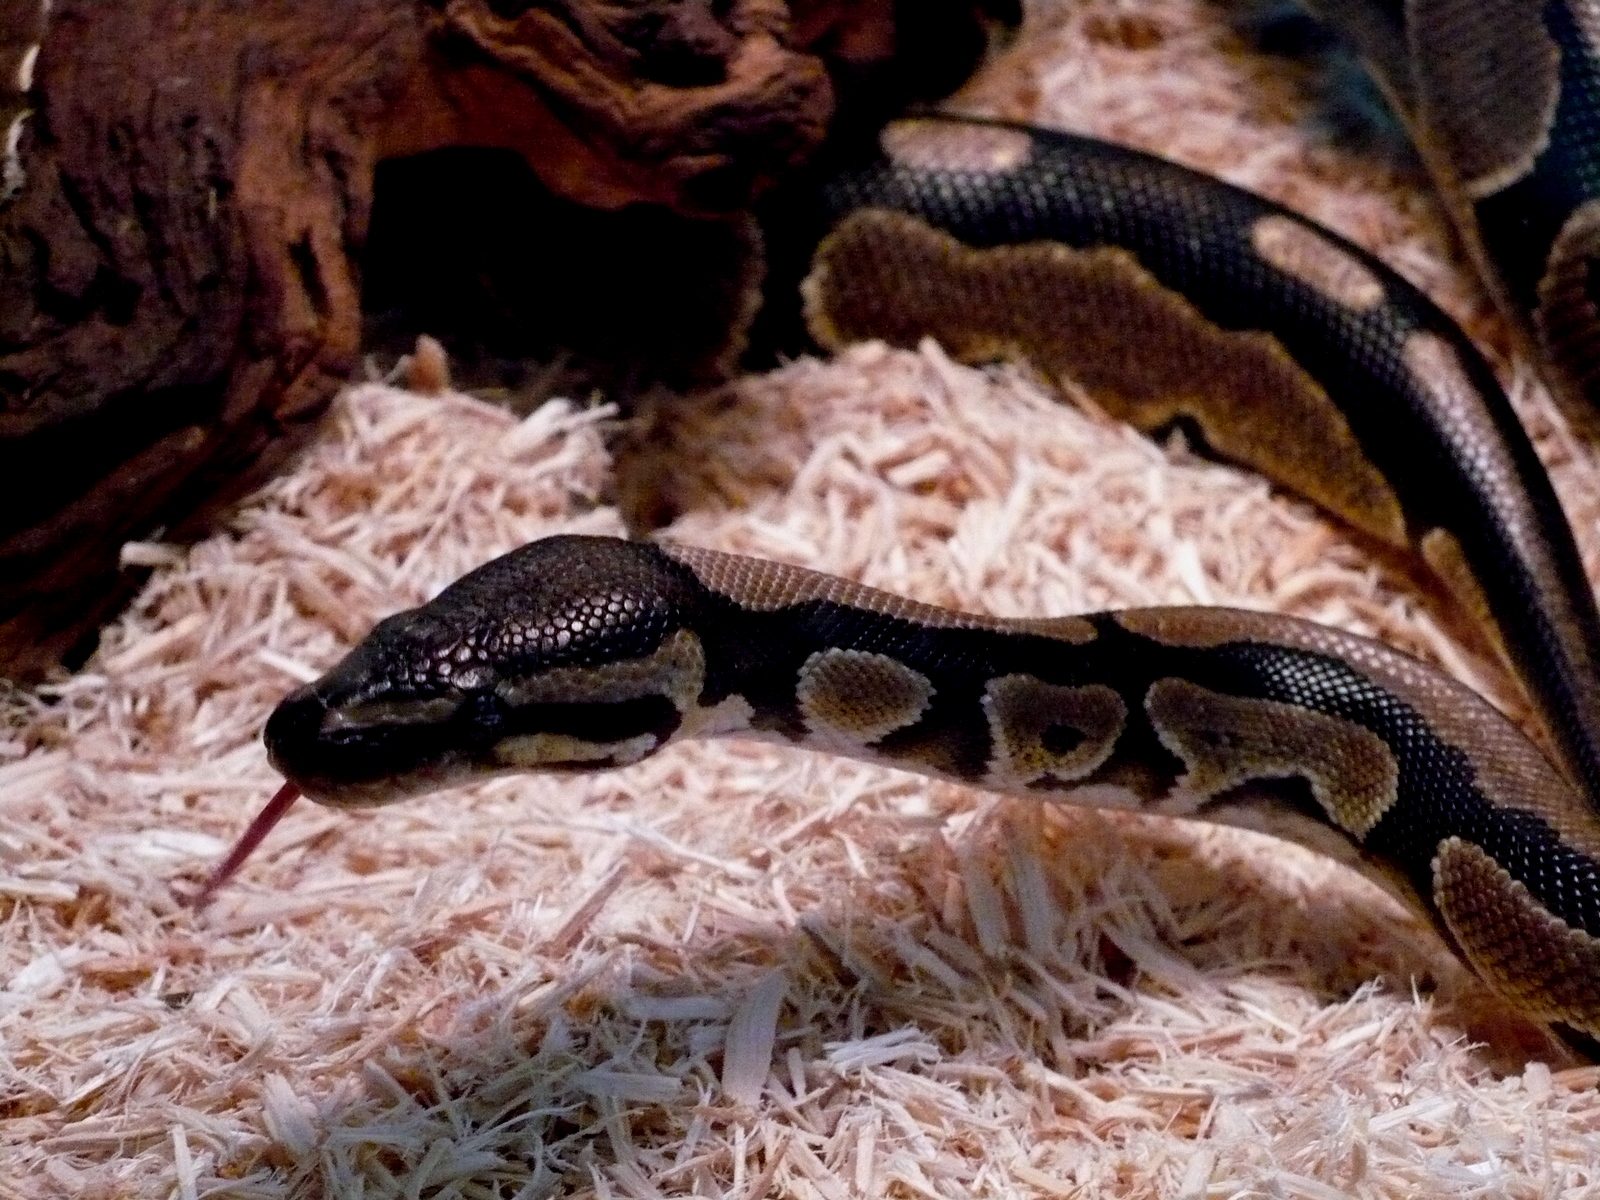 a snake sitting on some wood shavings